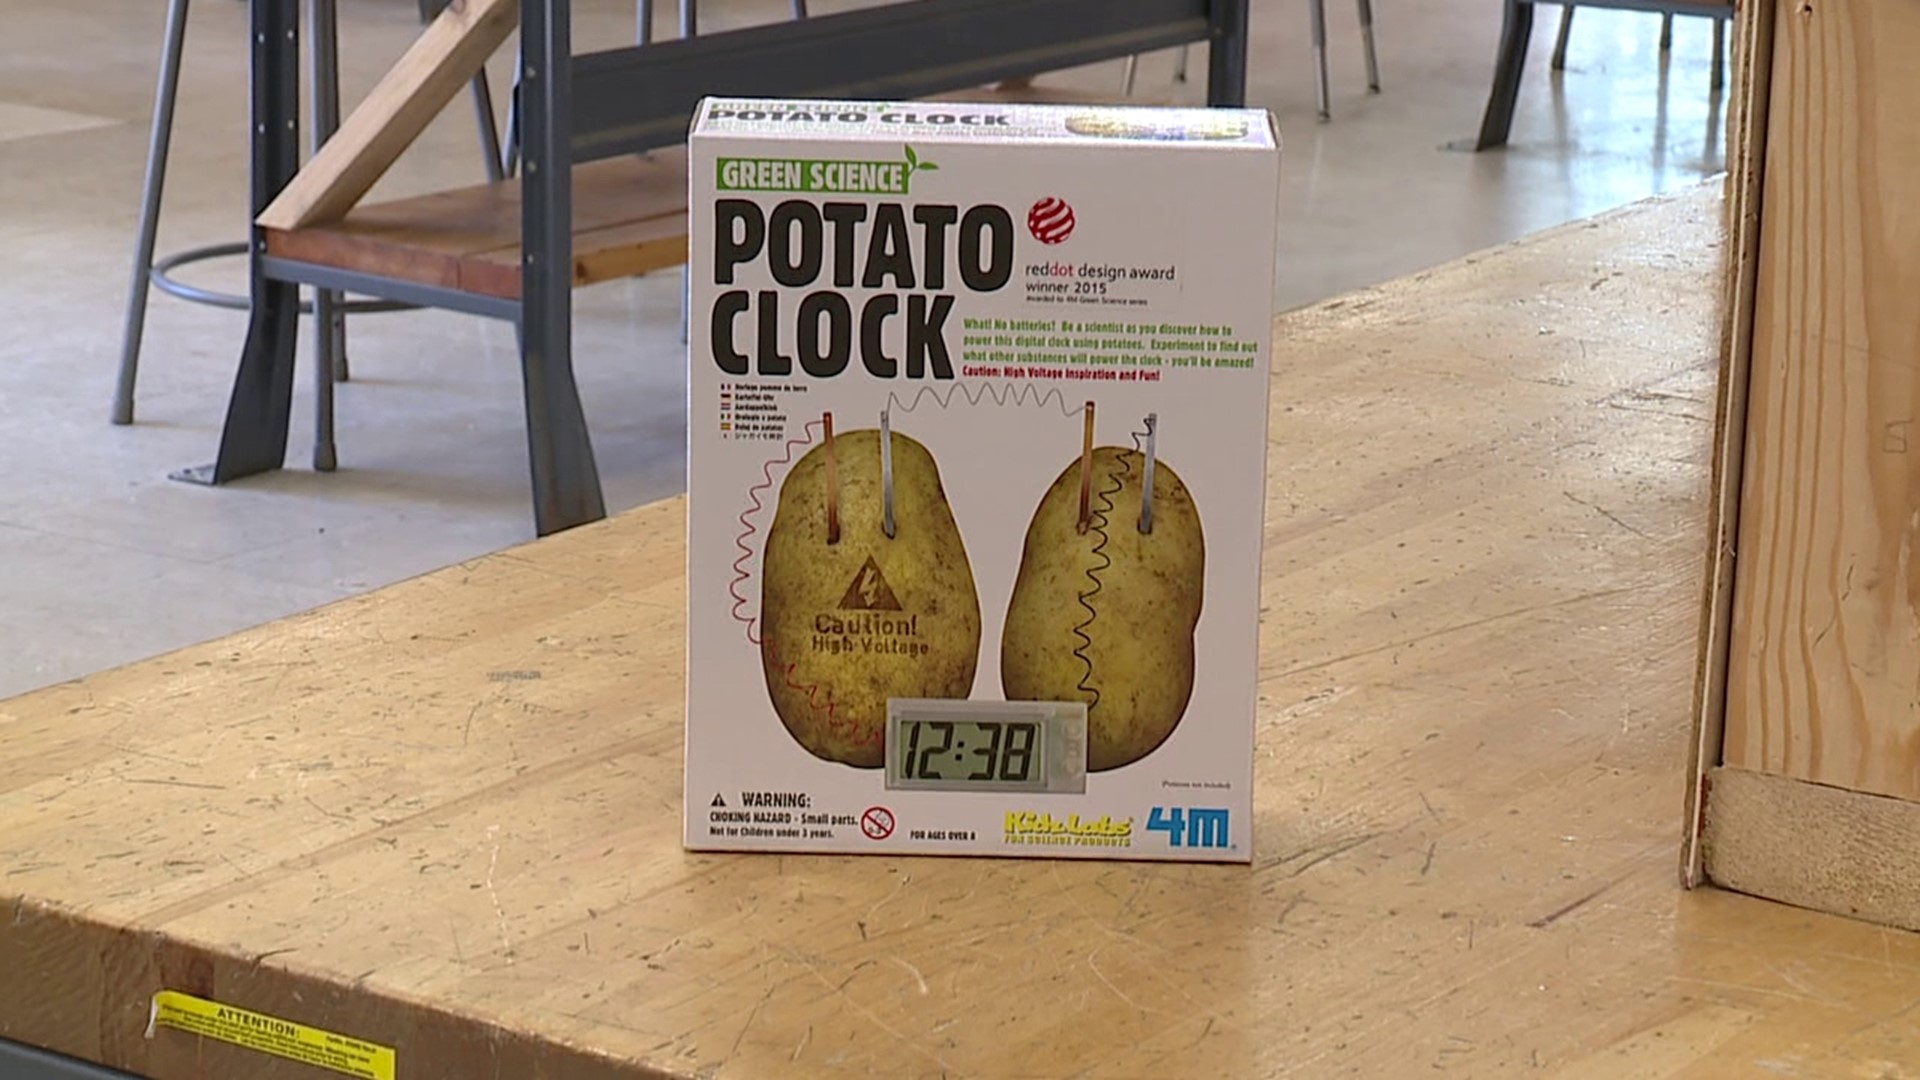 Power this digital clock using just potatoes! But does it really work?